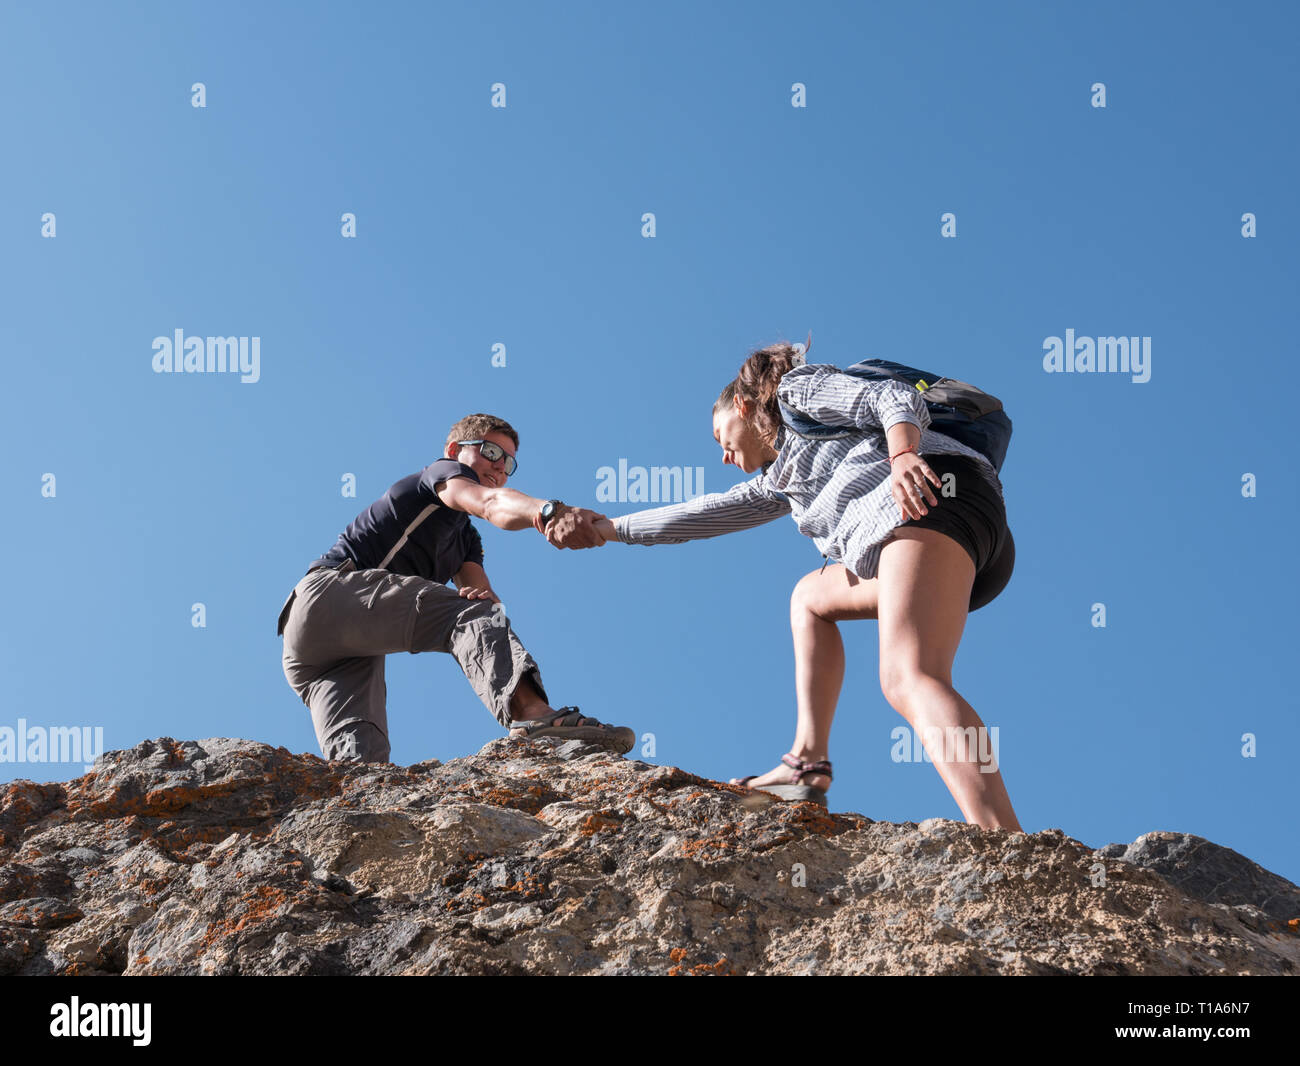 Helping hand couple hikers in mountains Stock Photo